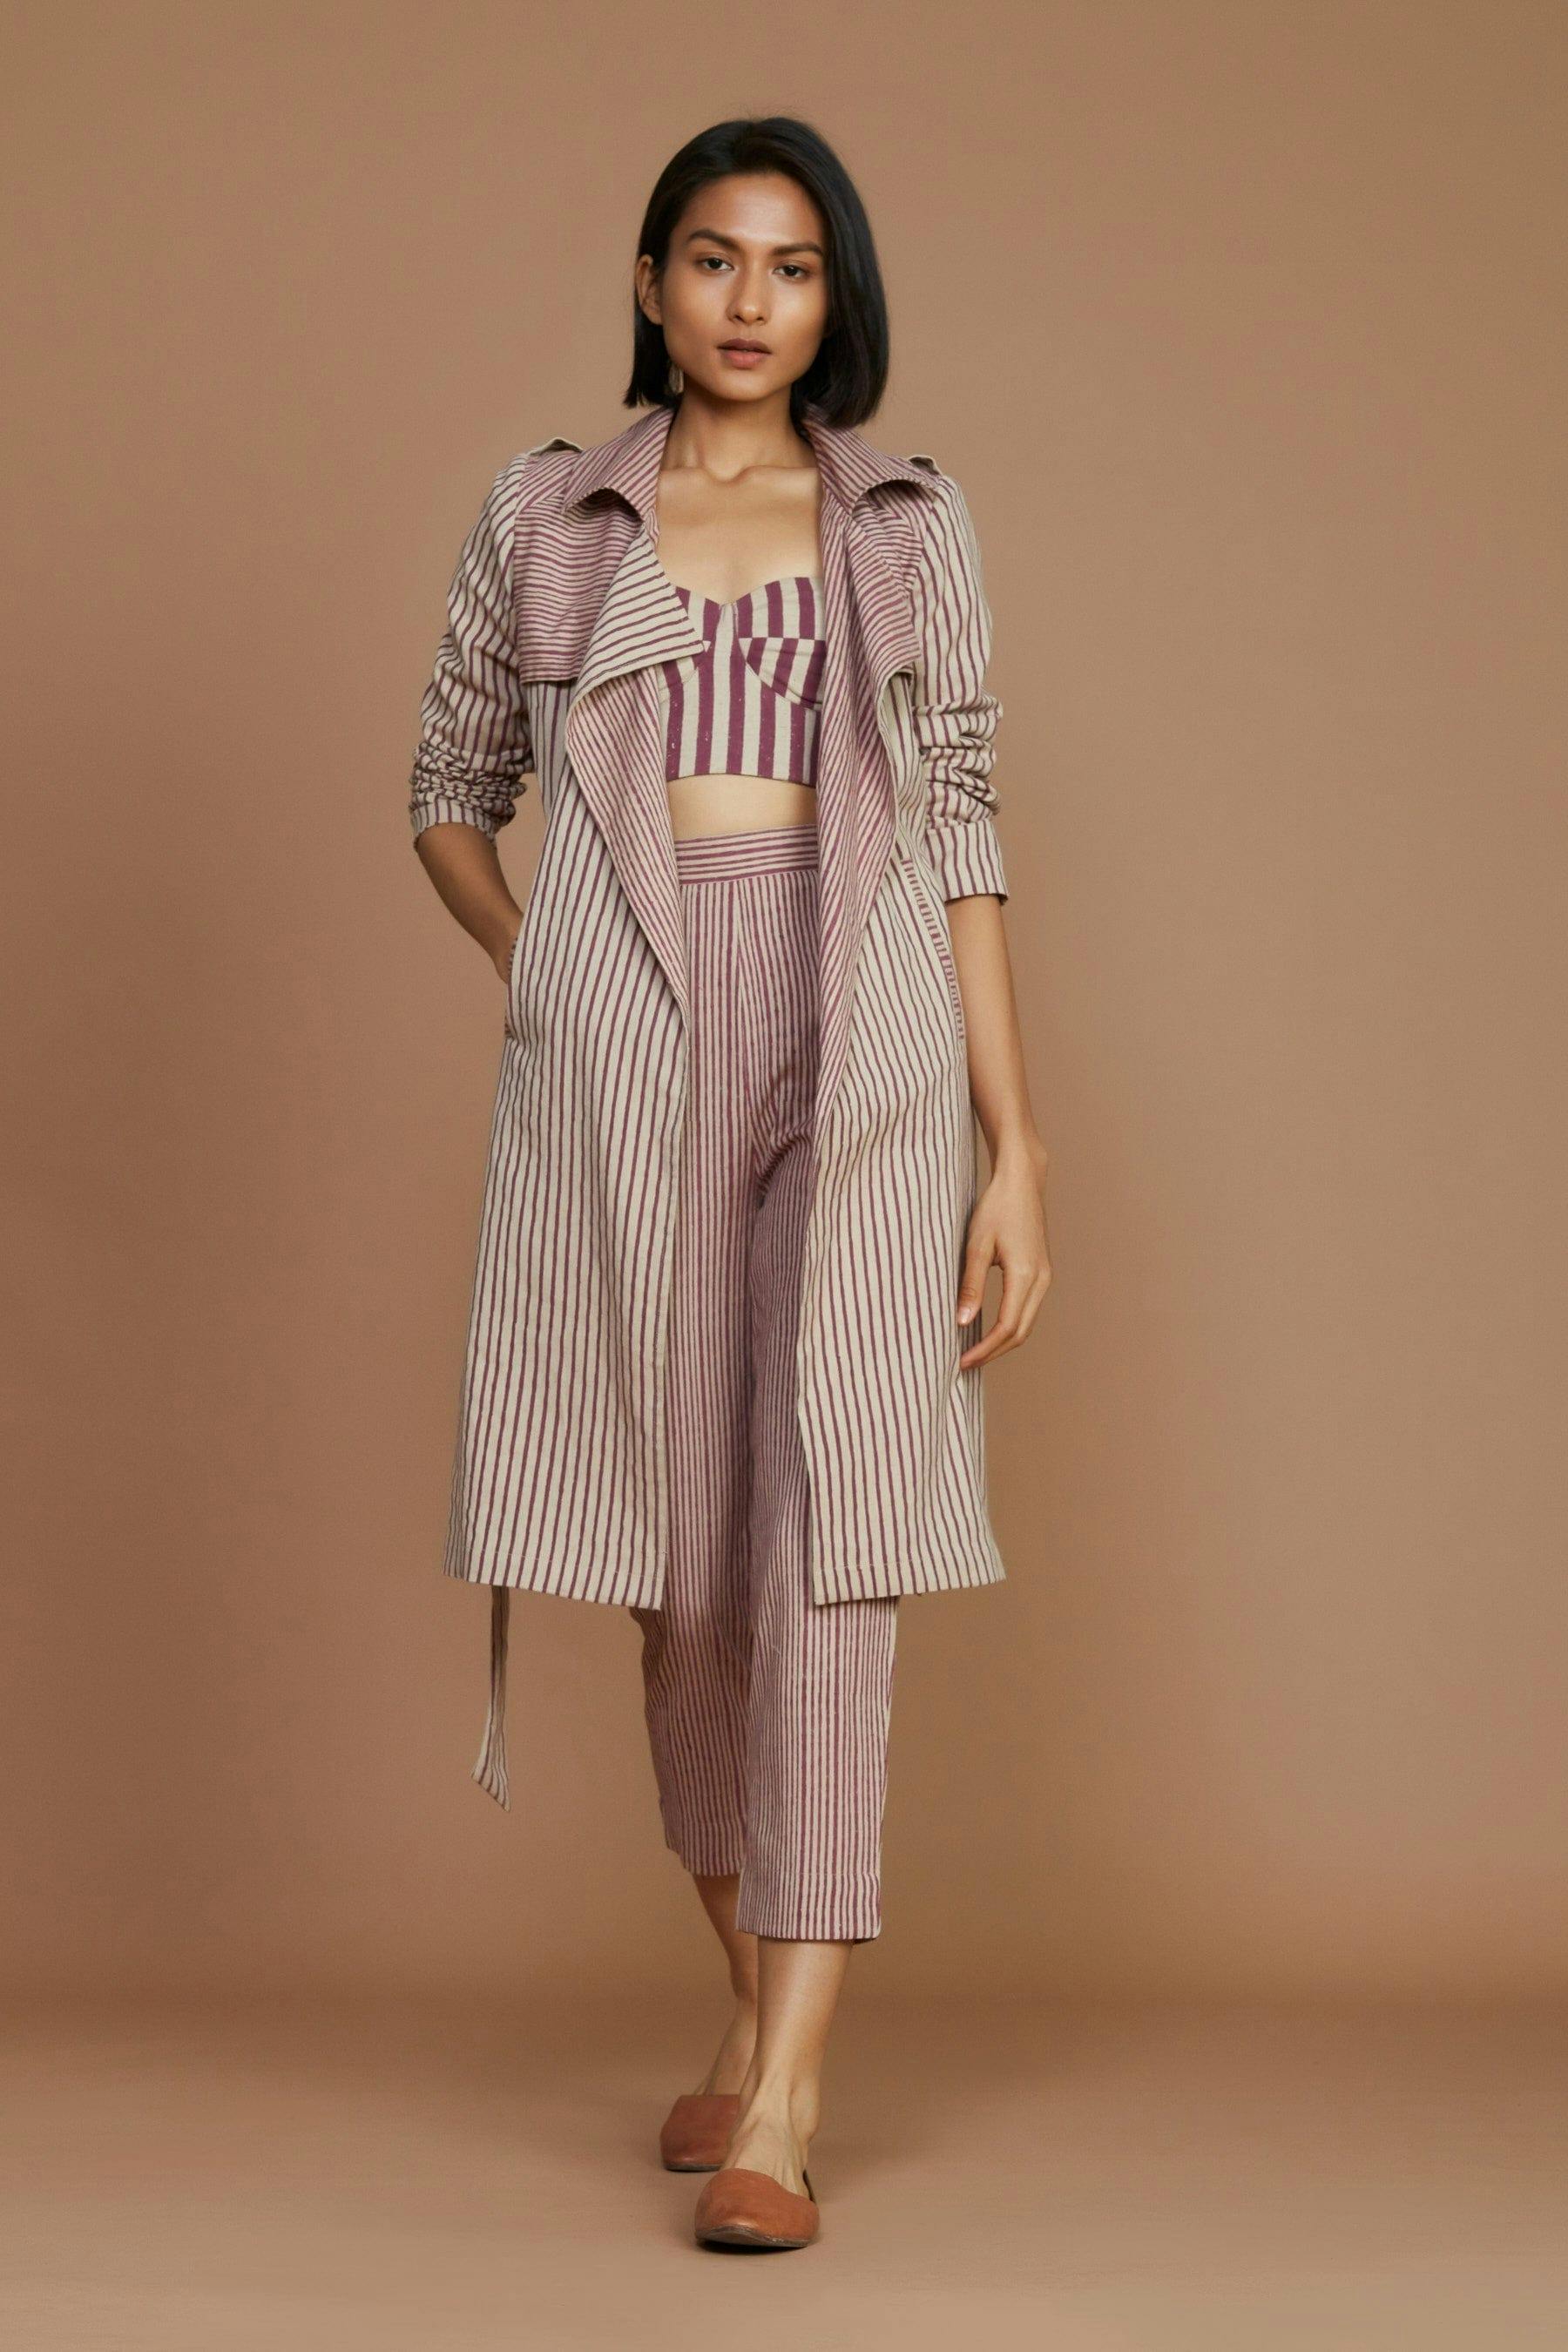 Ivory with Mauve Striped Trench Jacket, a product by Style Mati